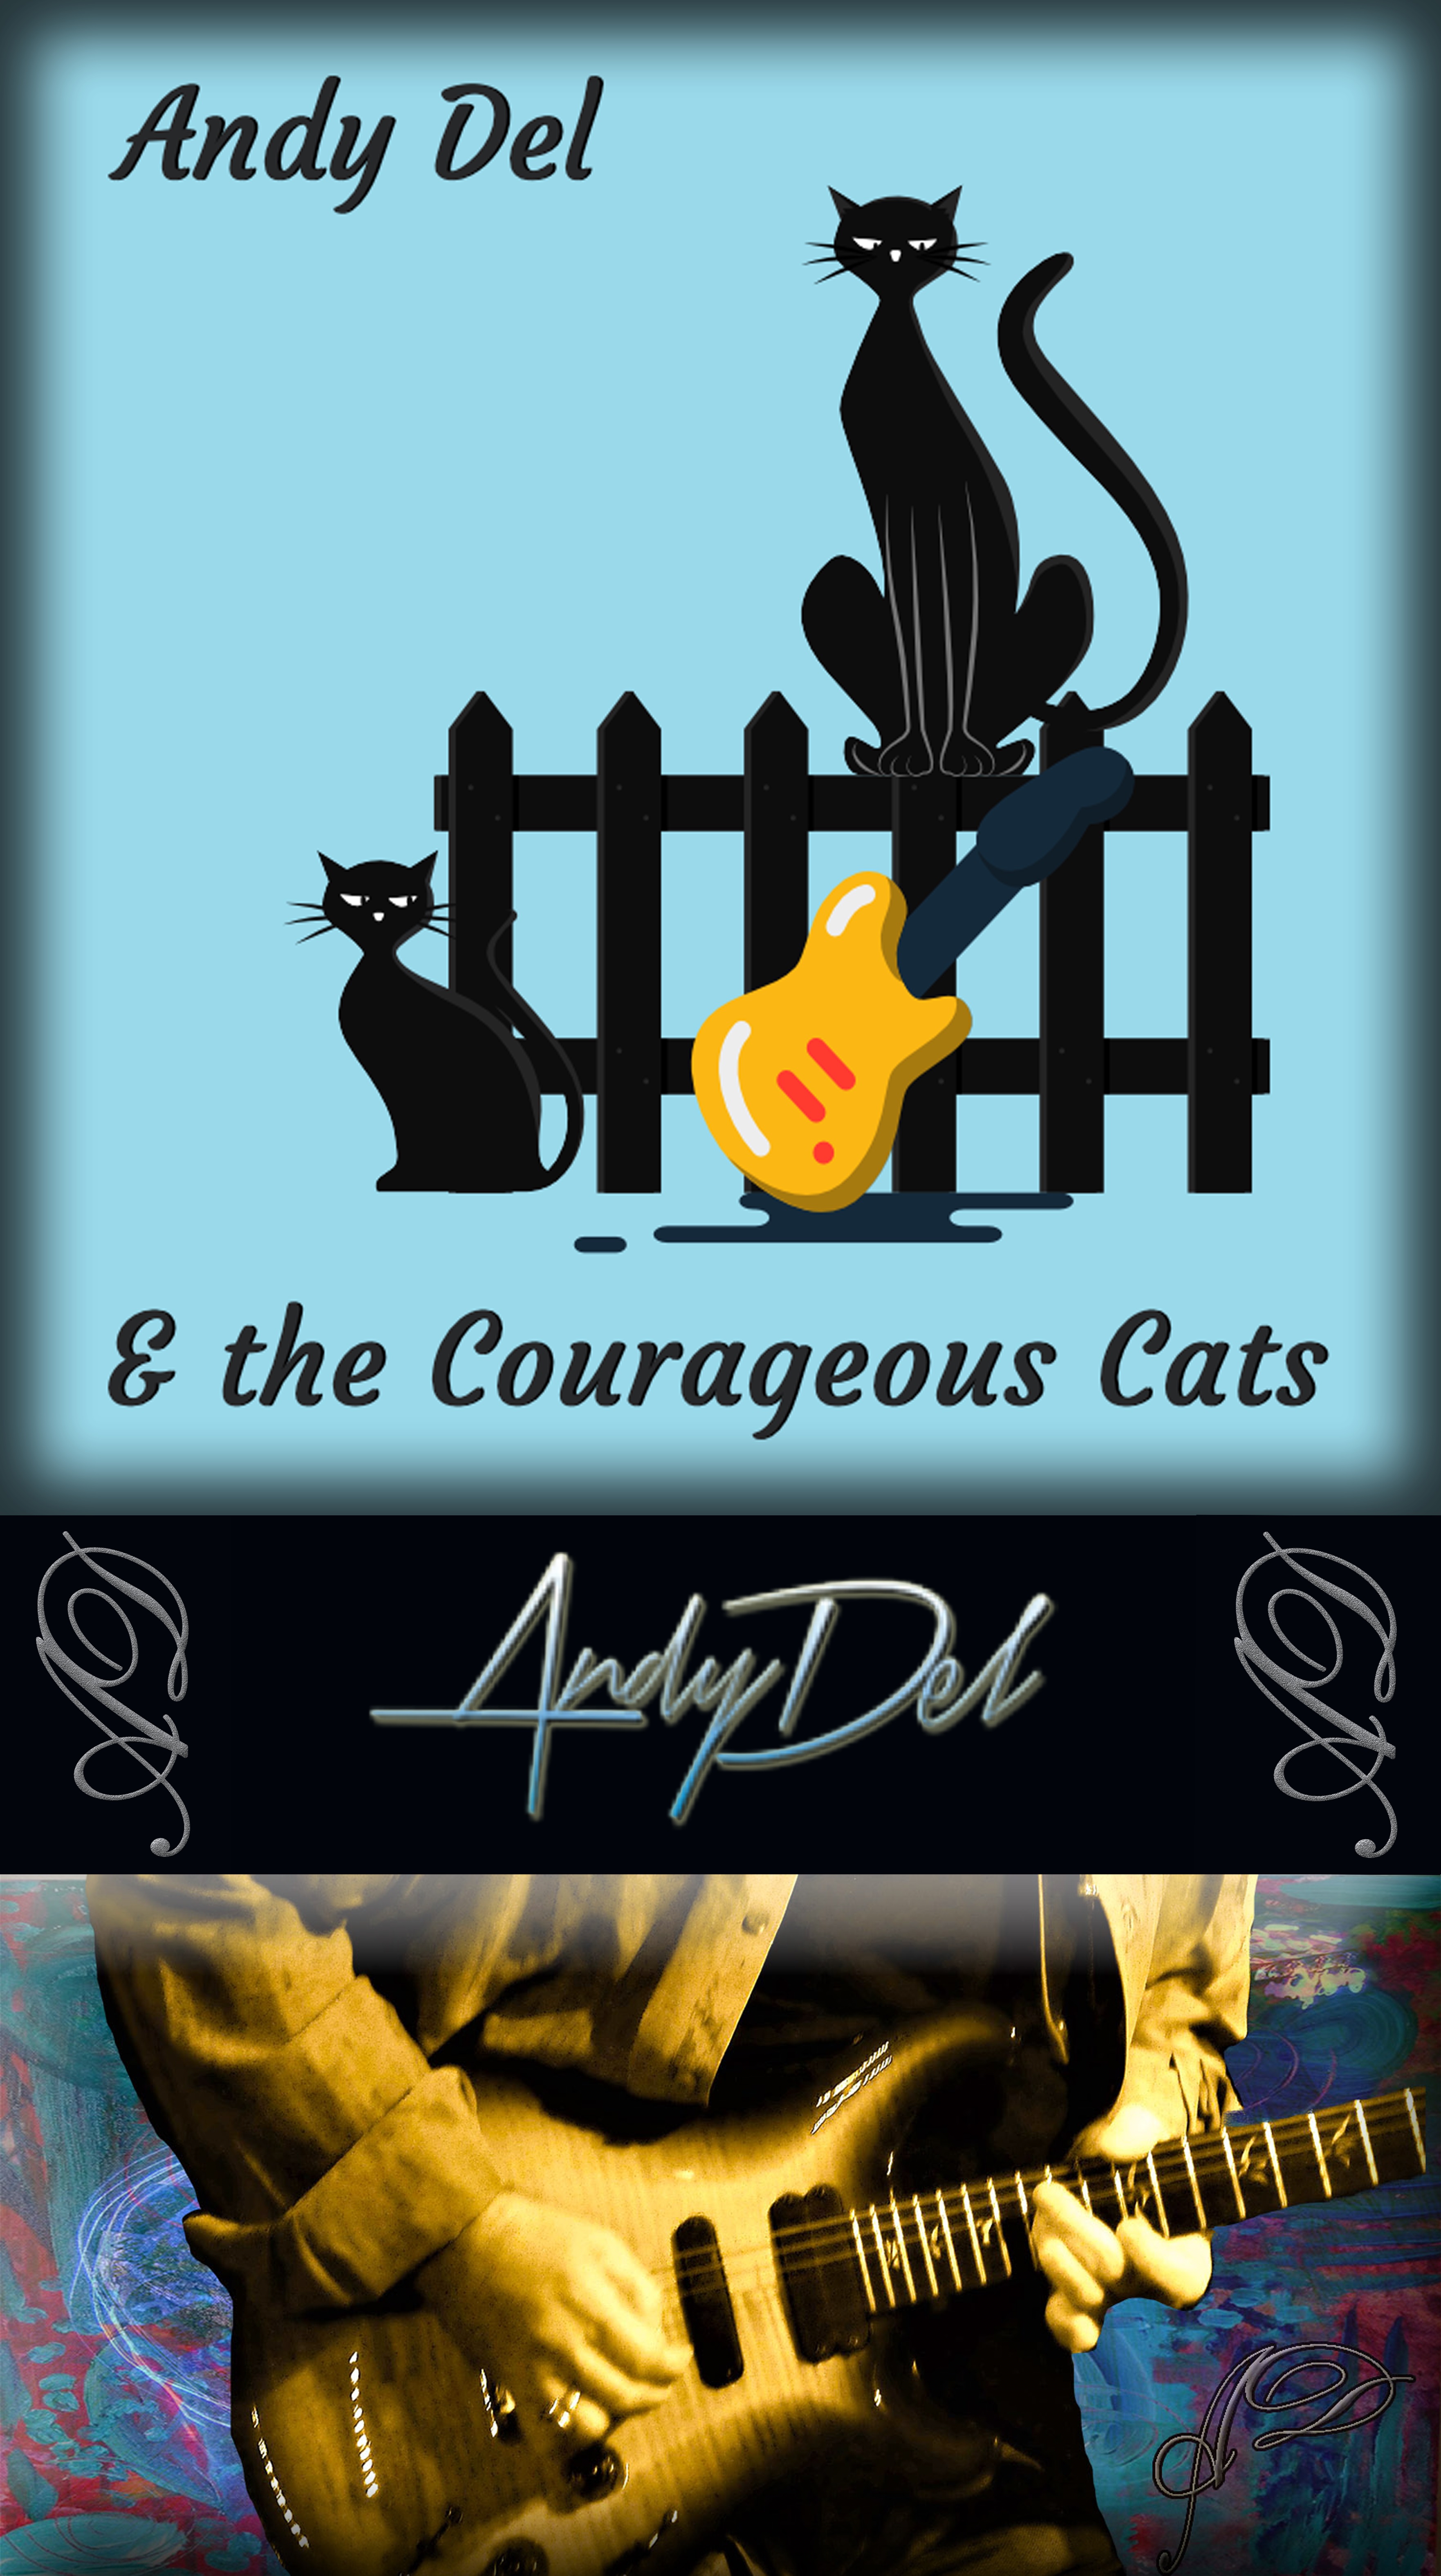 Andy Del and the Courageous Cats at Drift 82 - MEMORIAL DAY - Monday, May 27th